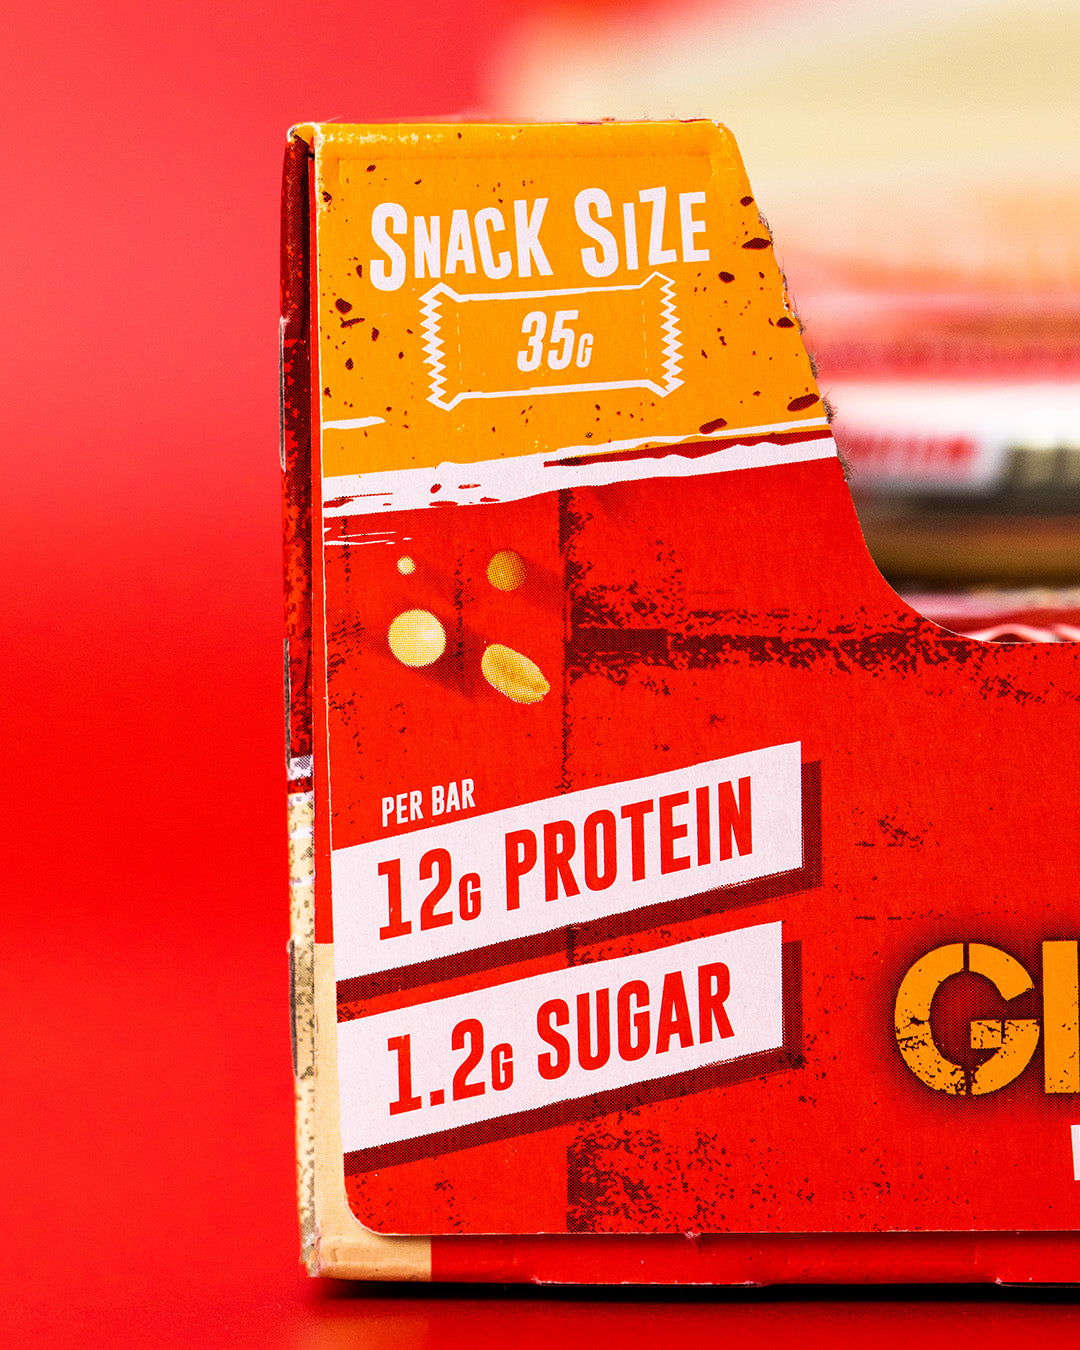 35g Snack Sized Protein Bar